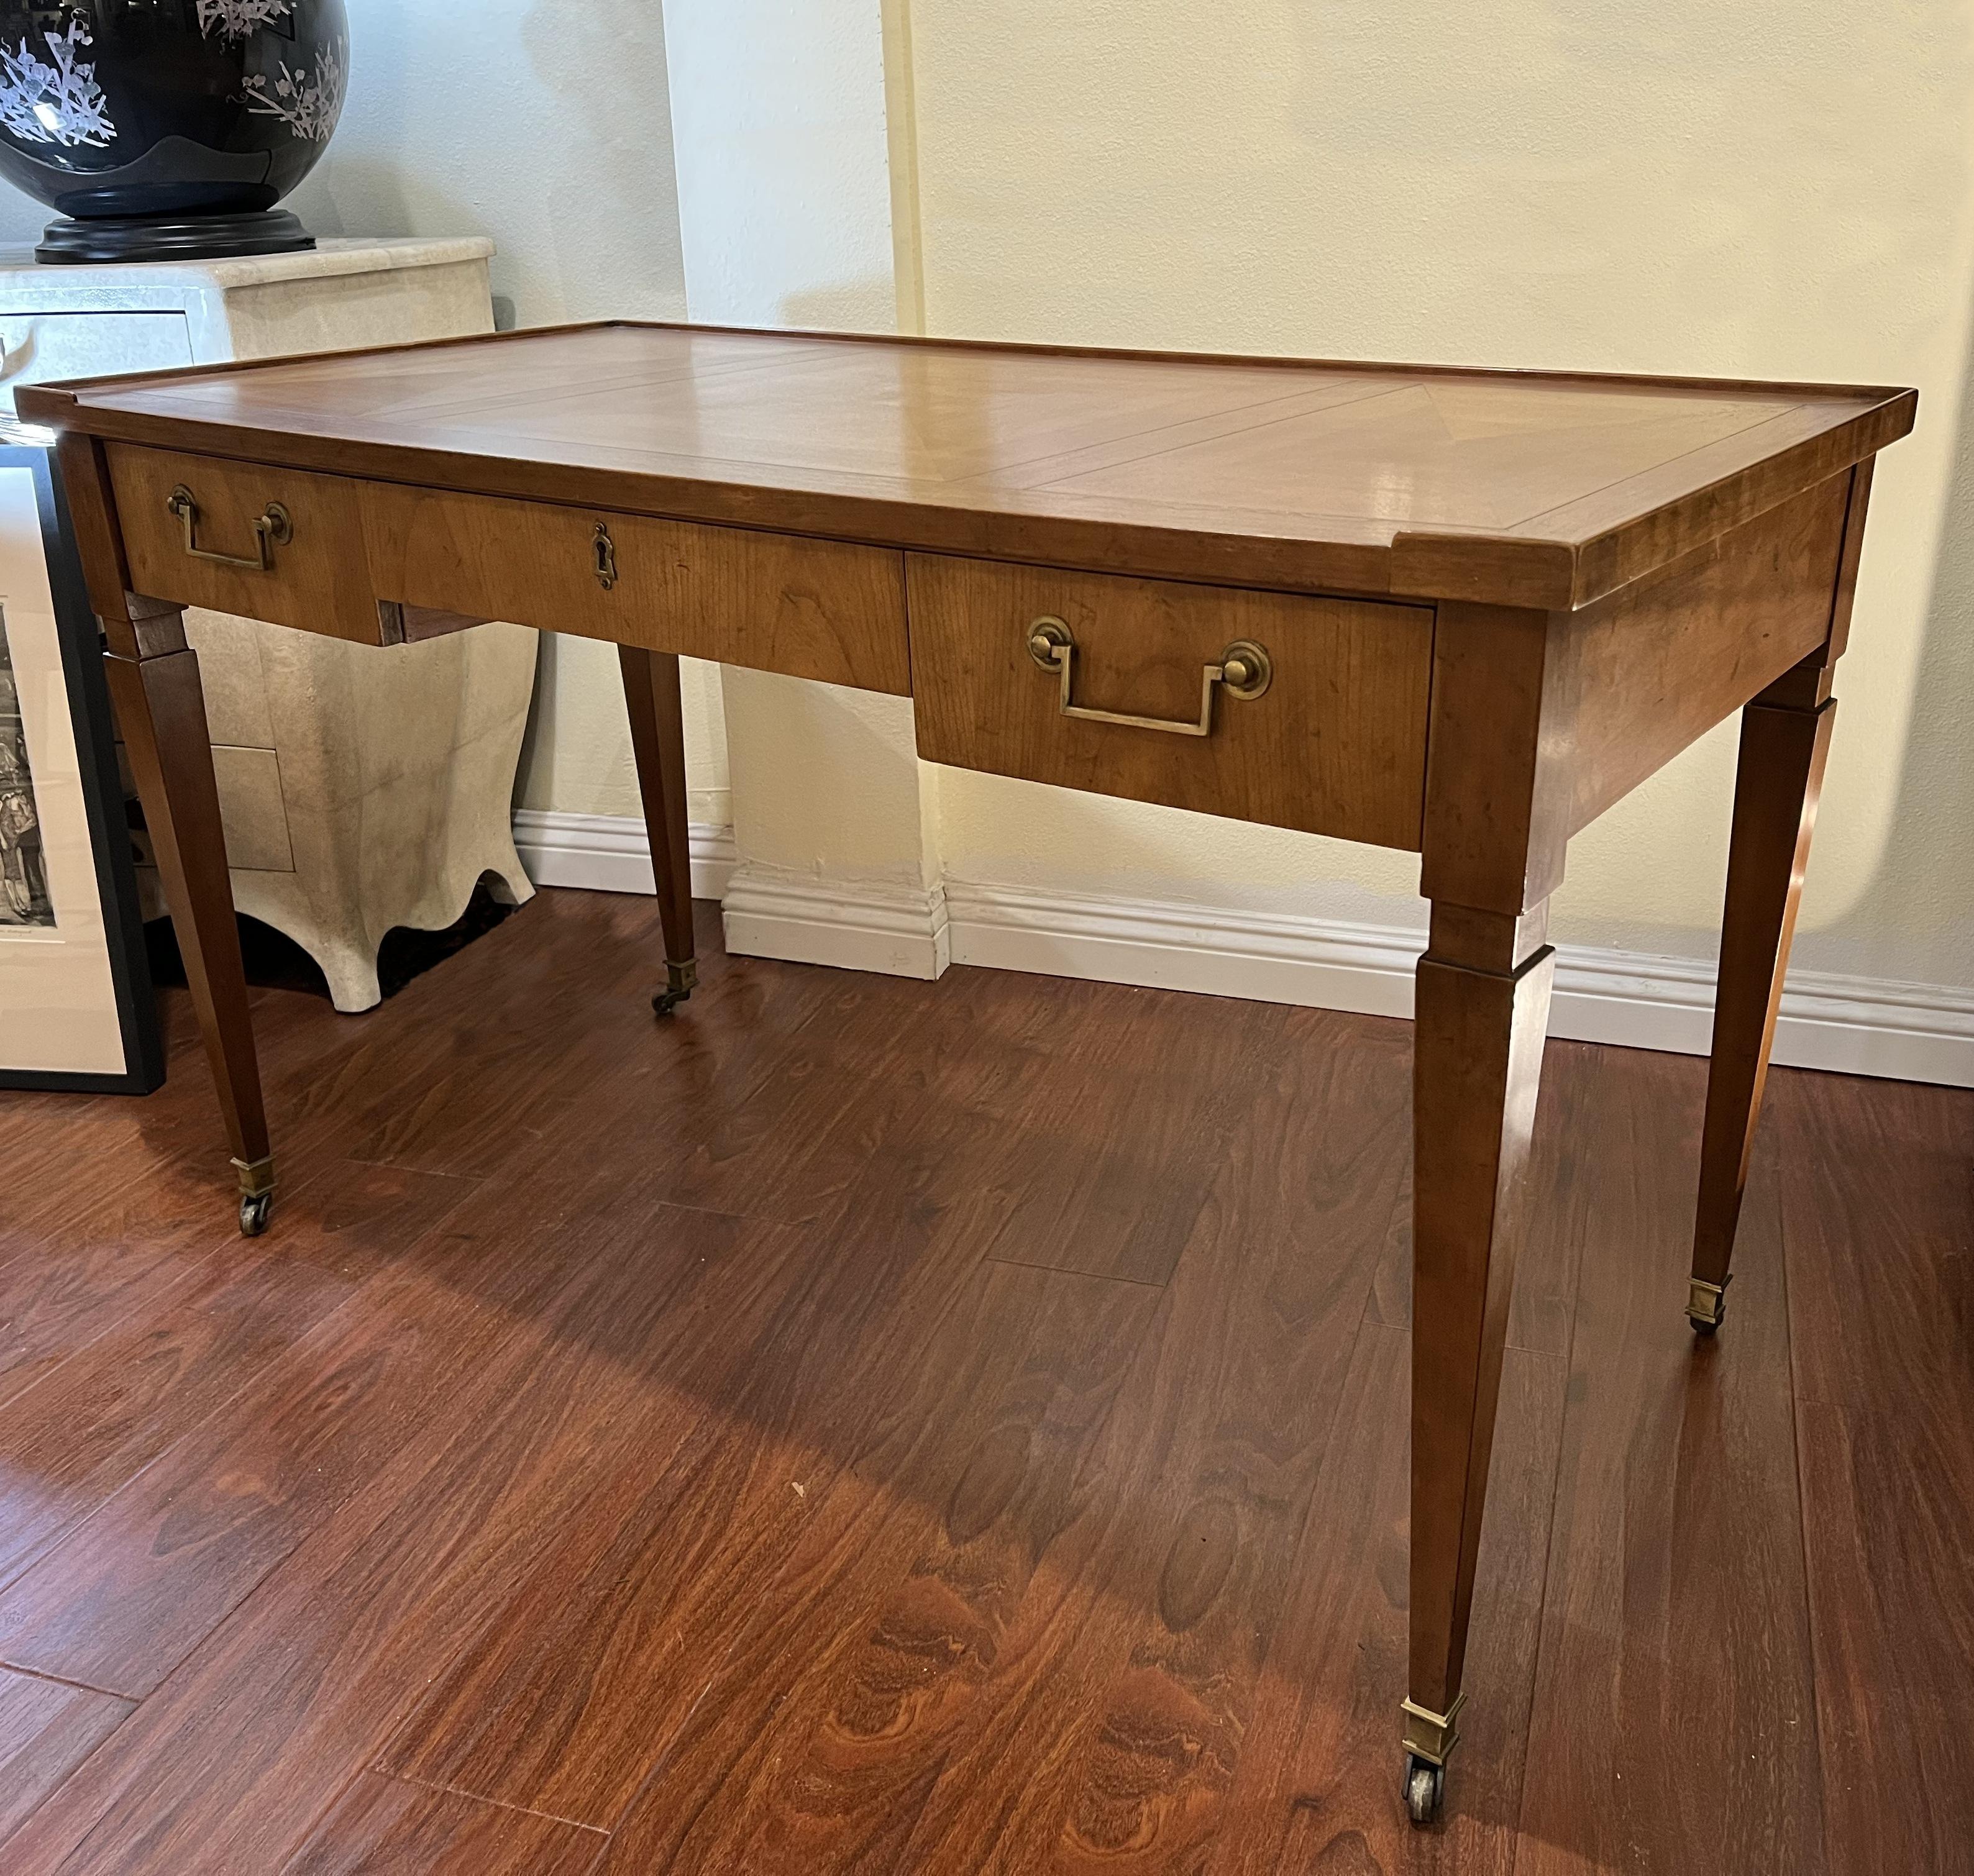 Walnut writing desk by Baker Furniture with brass handles.
A little flange around the back and sides is preventing your papers to fall down.